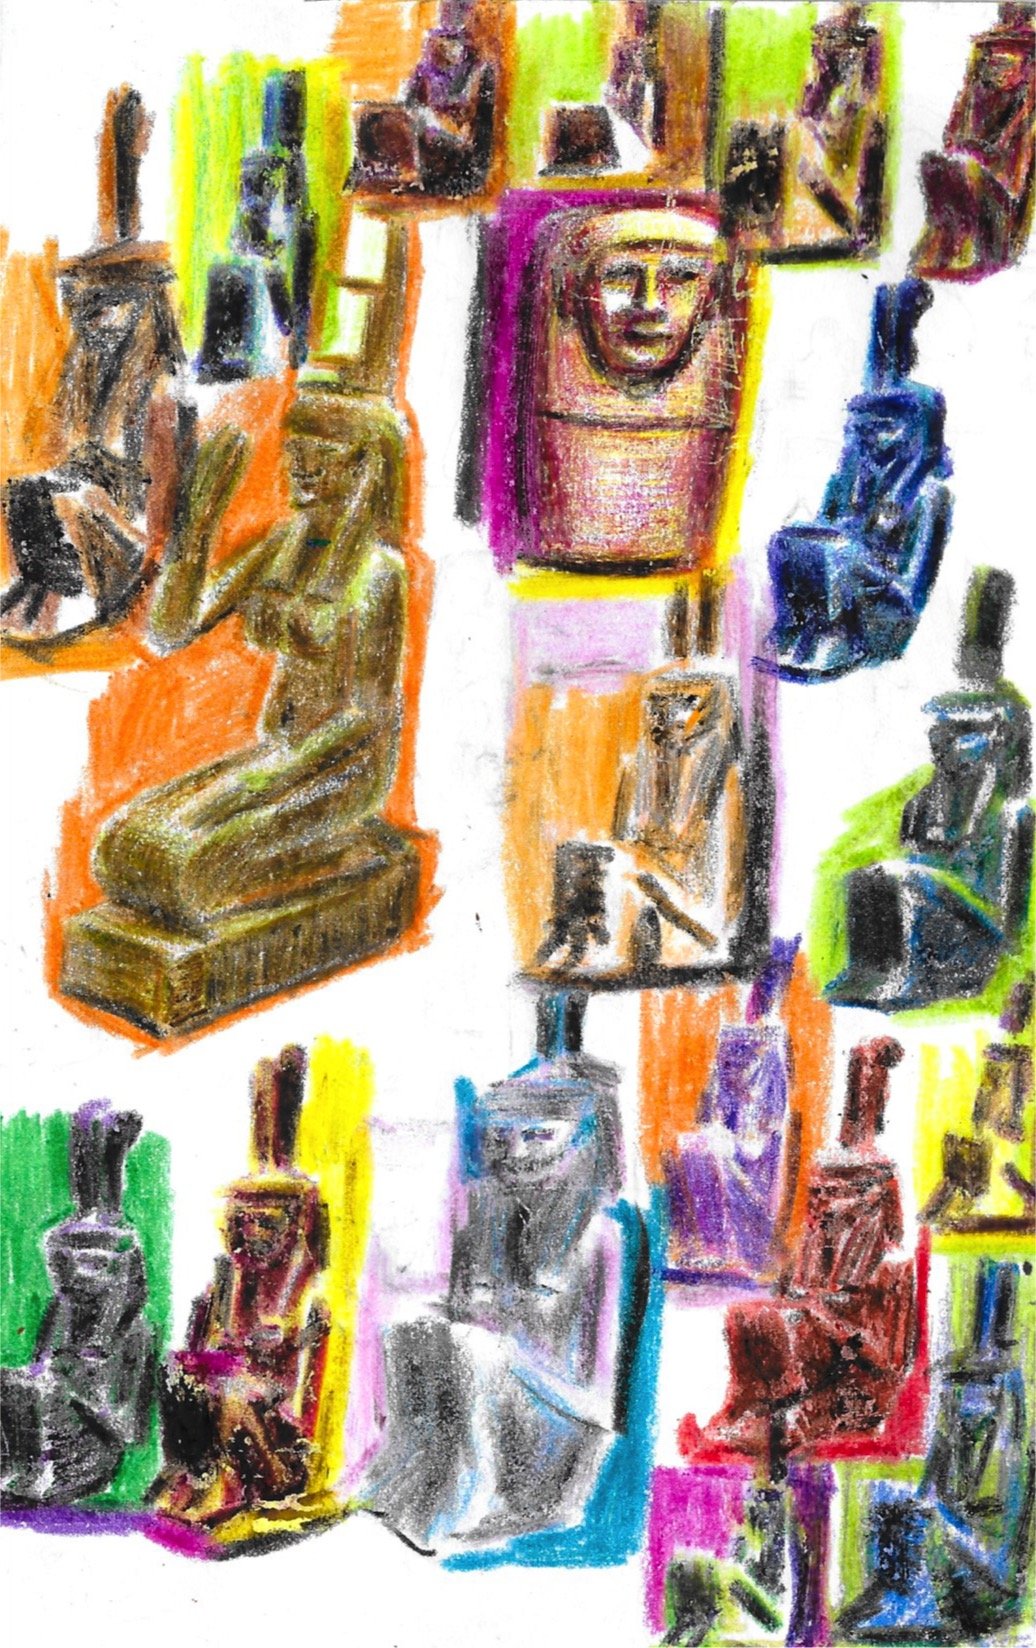   Maat   Mixed Media on A5 paper. 14cm x 21cm (5-7/8” x 8-1/4”). 2021. Maxime Mballa-Tagny.   Click here to inquire.  